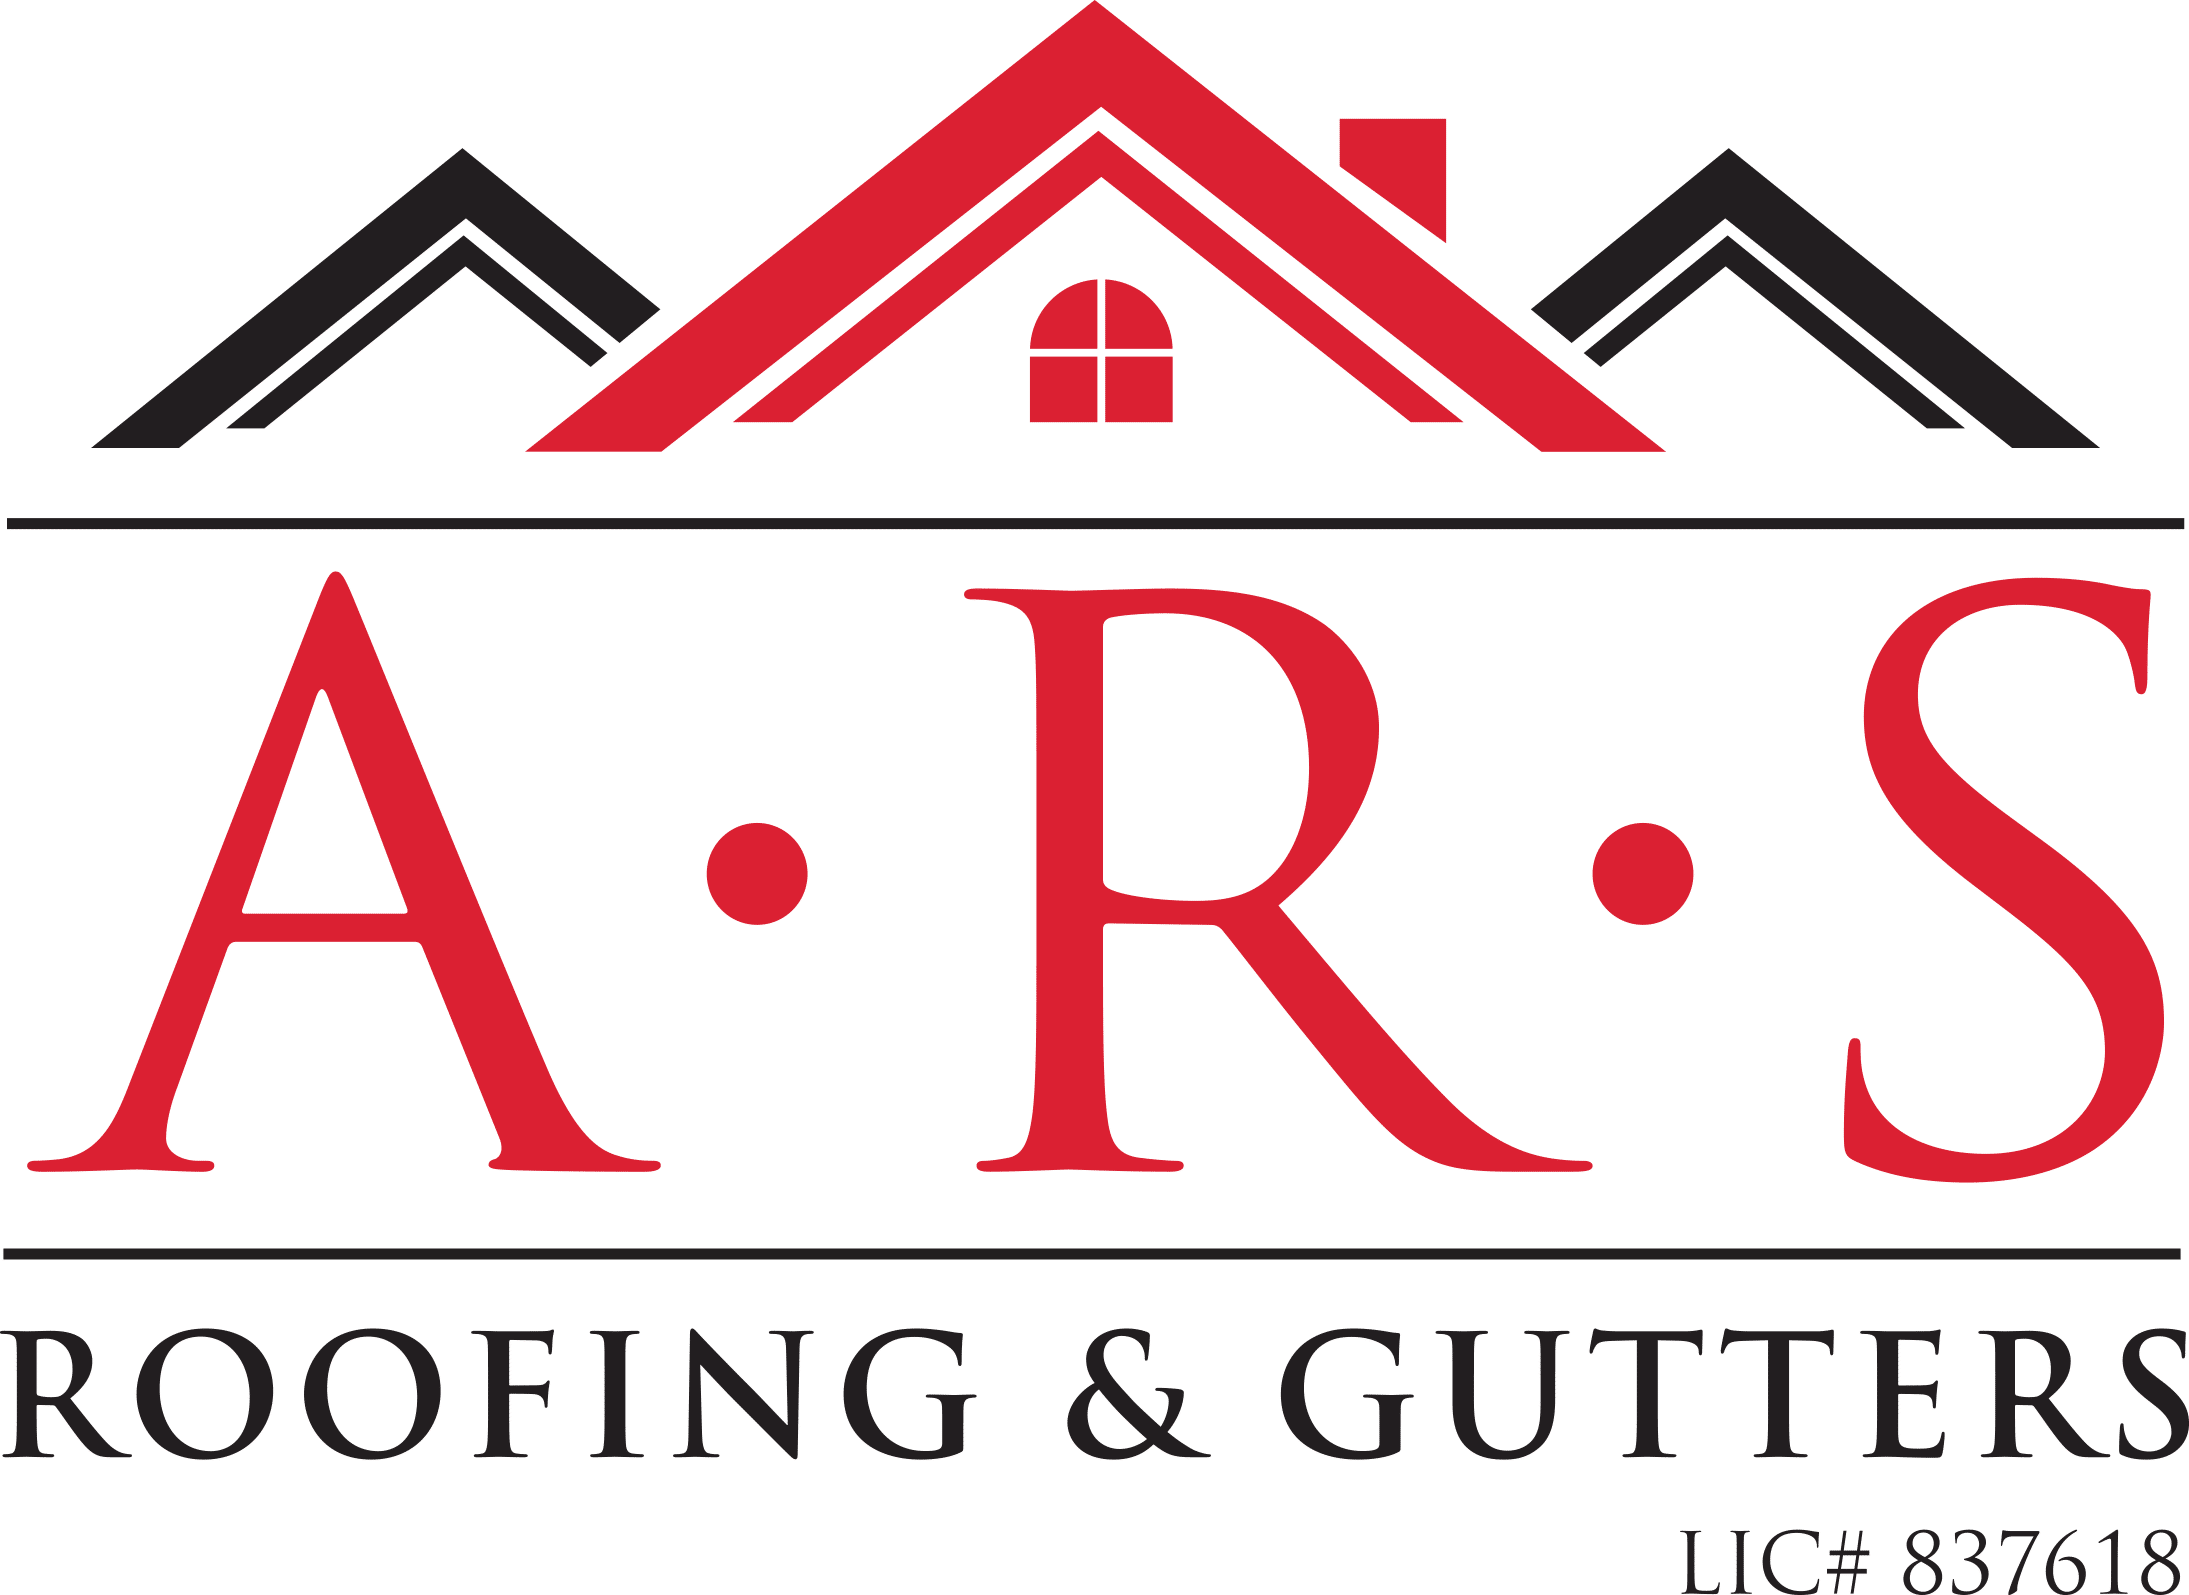 Ars roofing & gutters logo.